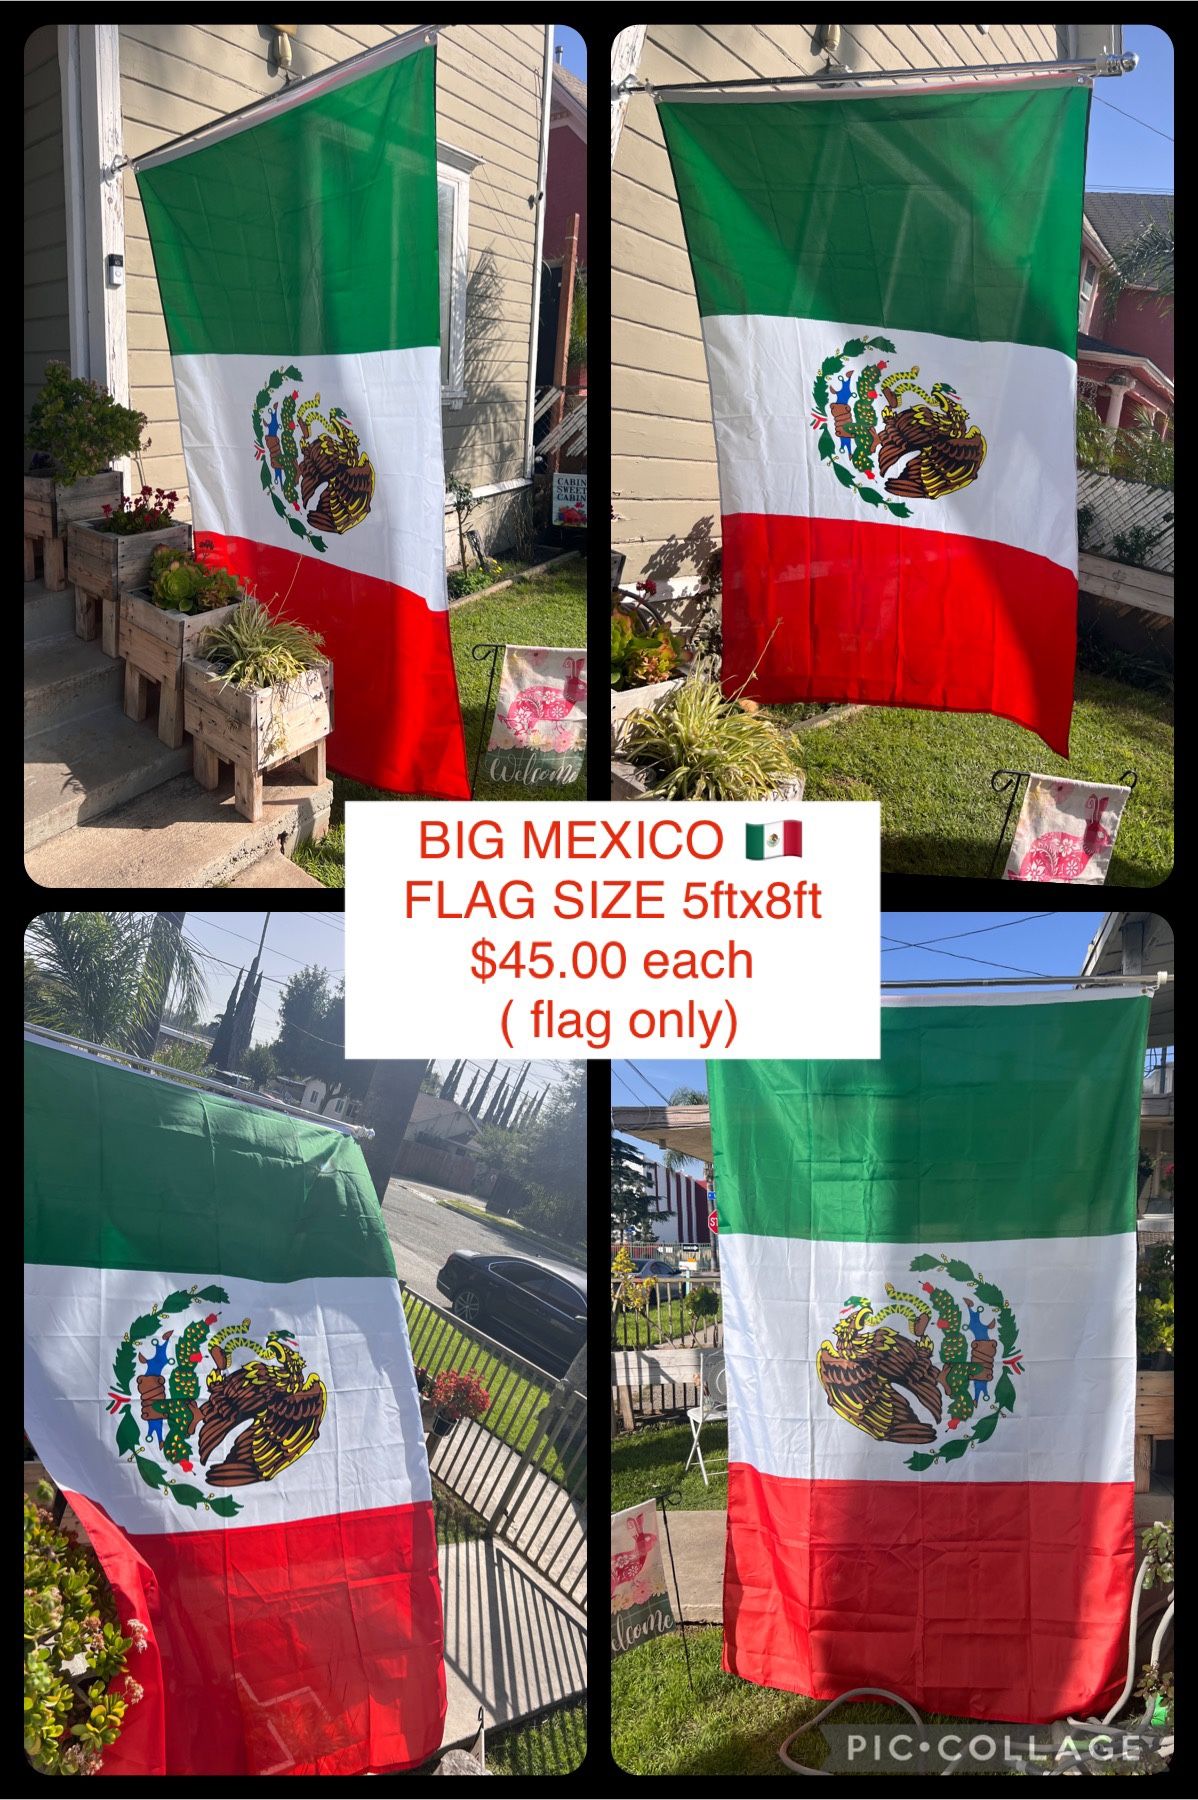 Mexico Flag Size 5ftx8ft 